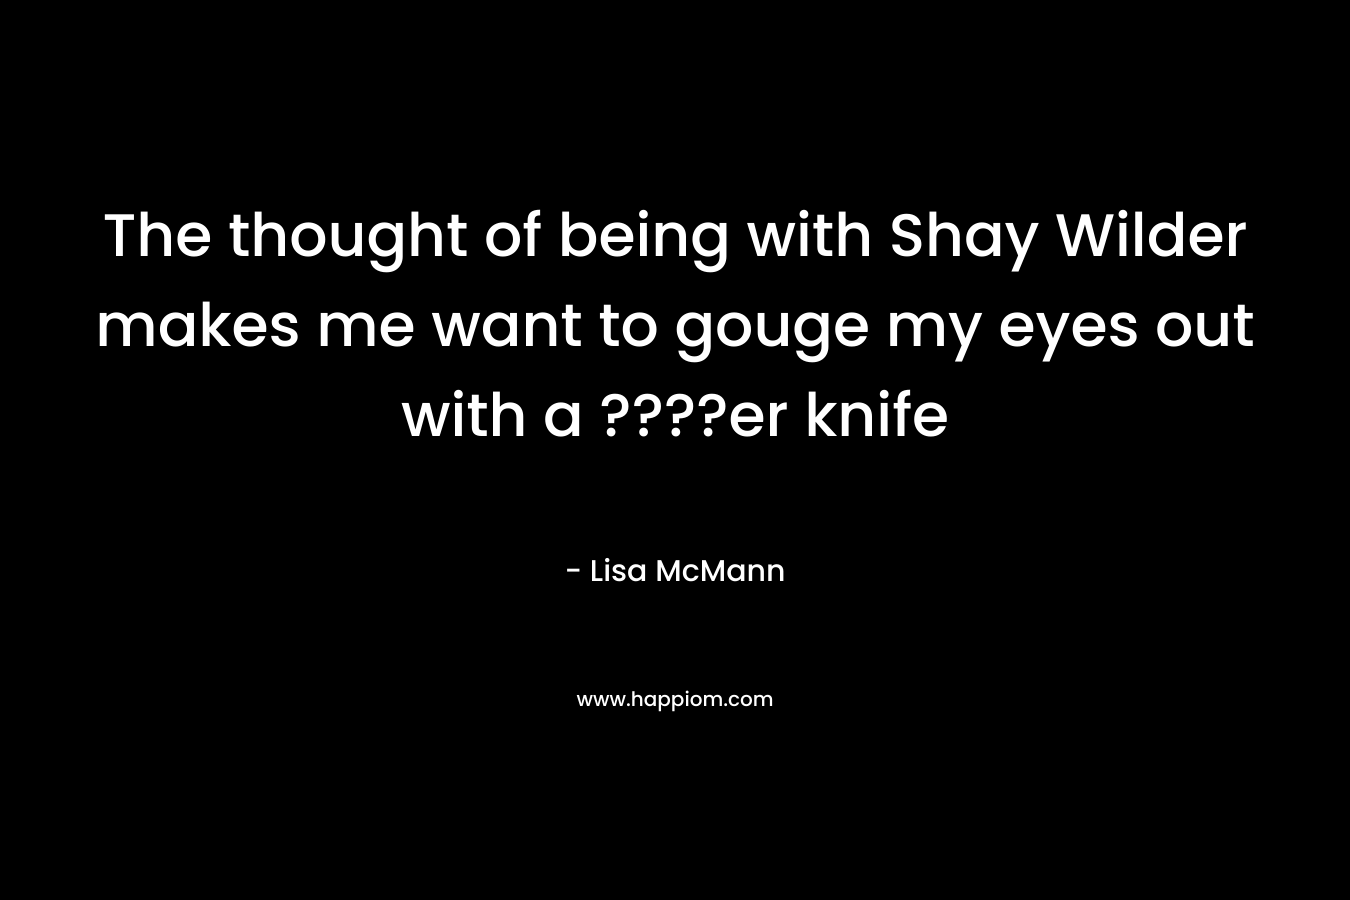 The thought of being with Shay Wilder makes me want to gouge my eyes out with a ????er knife